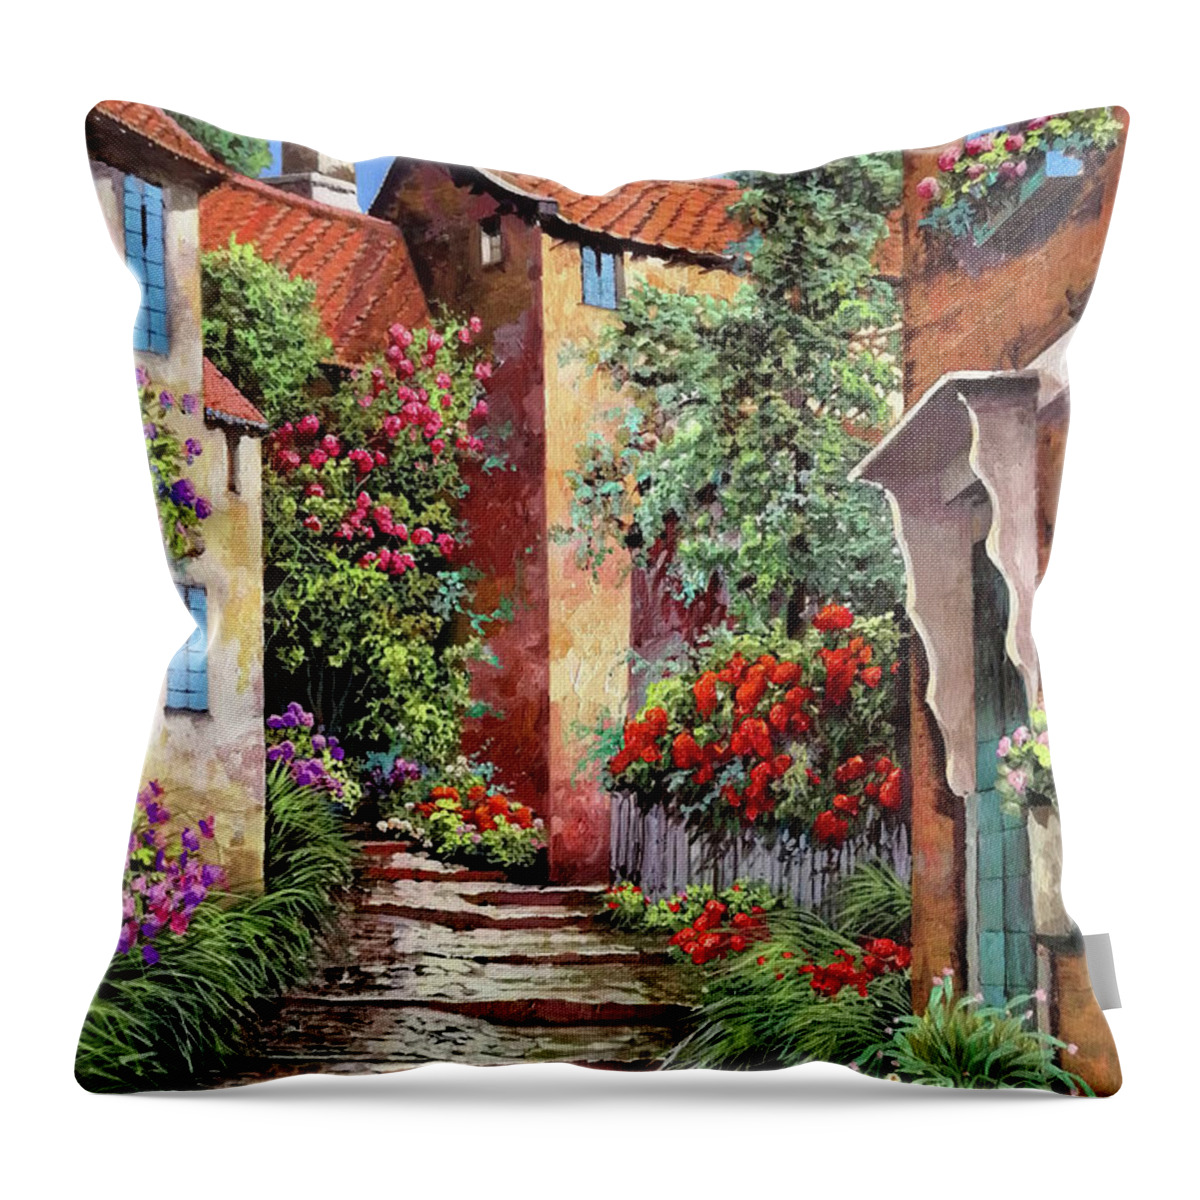 Steps Throw Pillow featuring the painting Su Per I Gradini by Guido Borelli